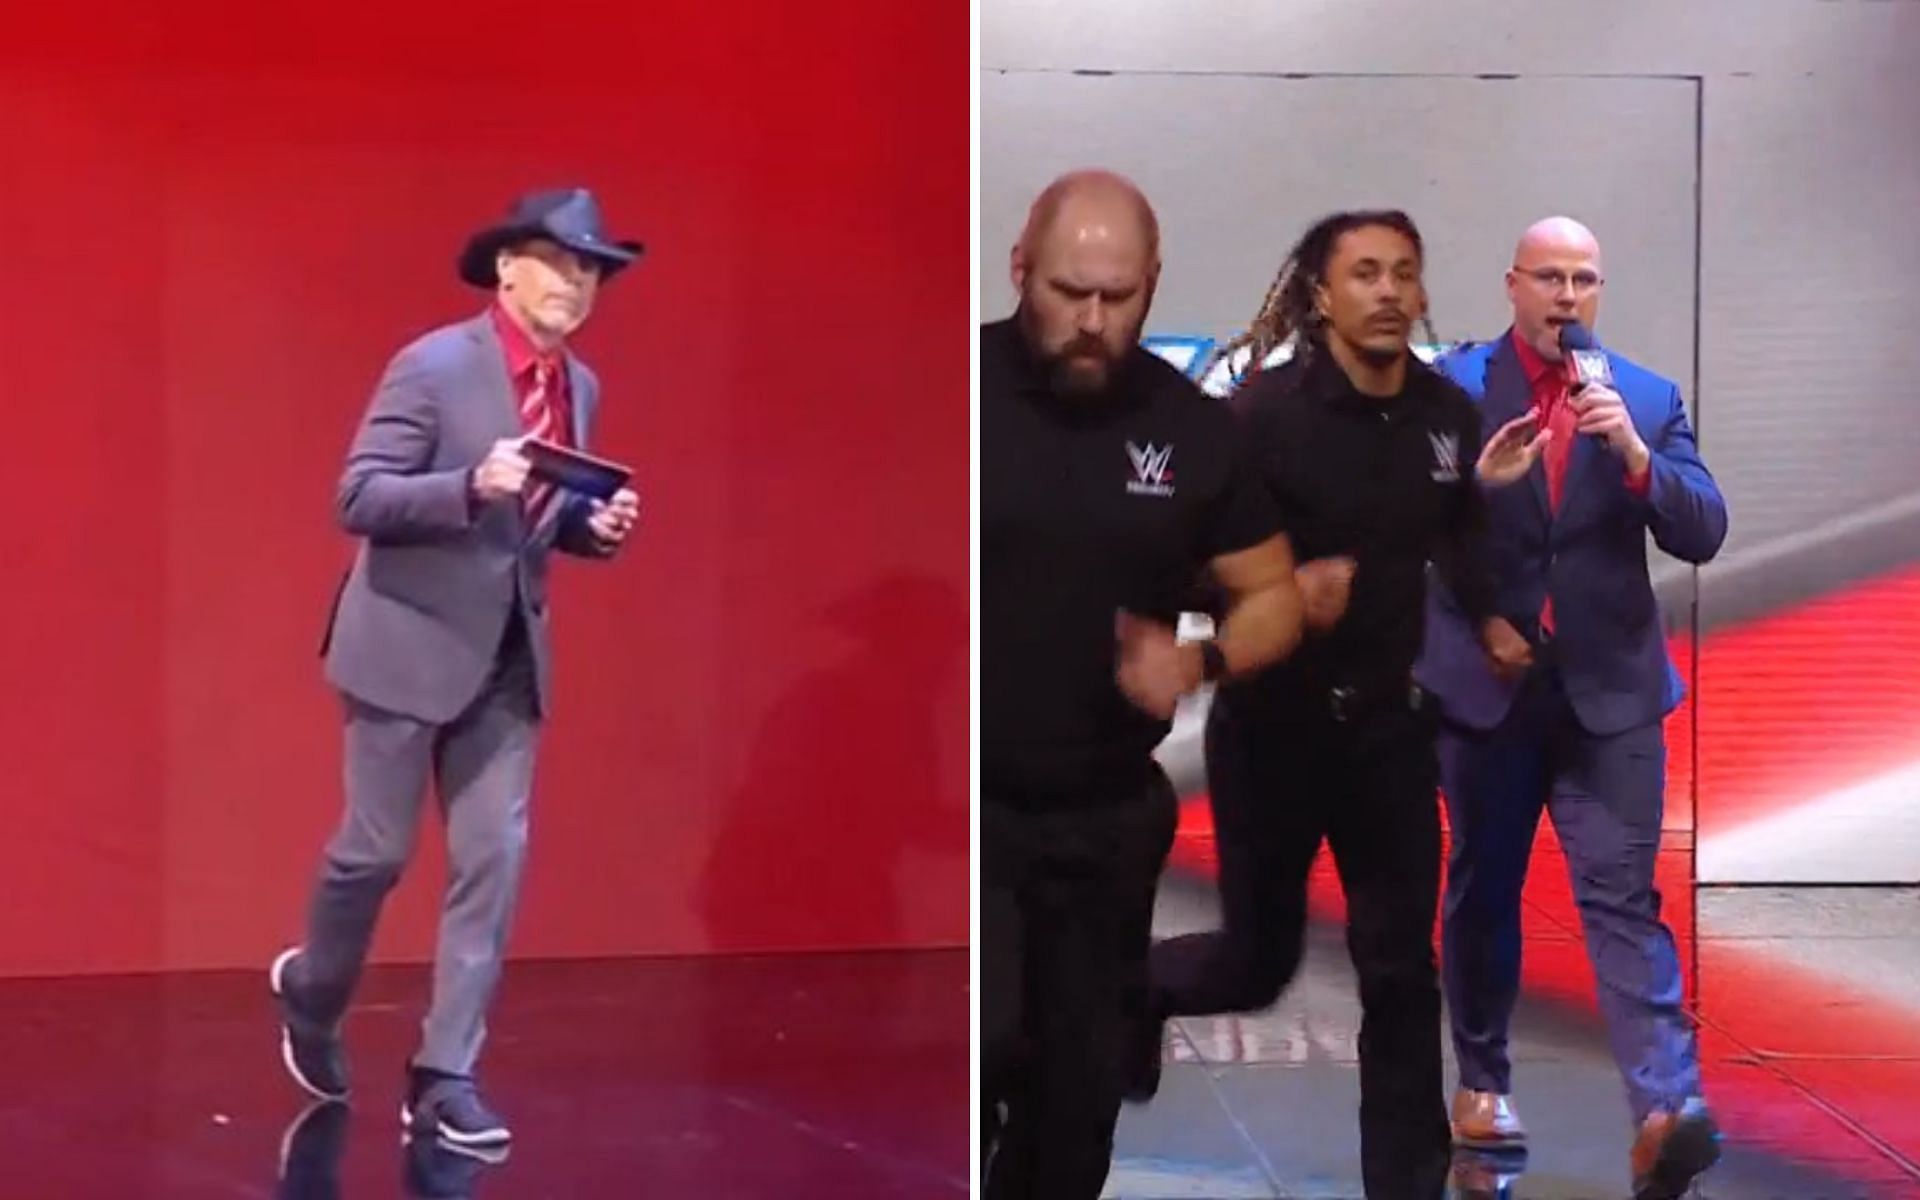 Shawn Michaels was supposed to make the announcements for Round 3 of the draft